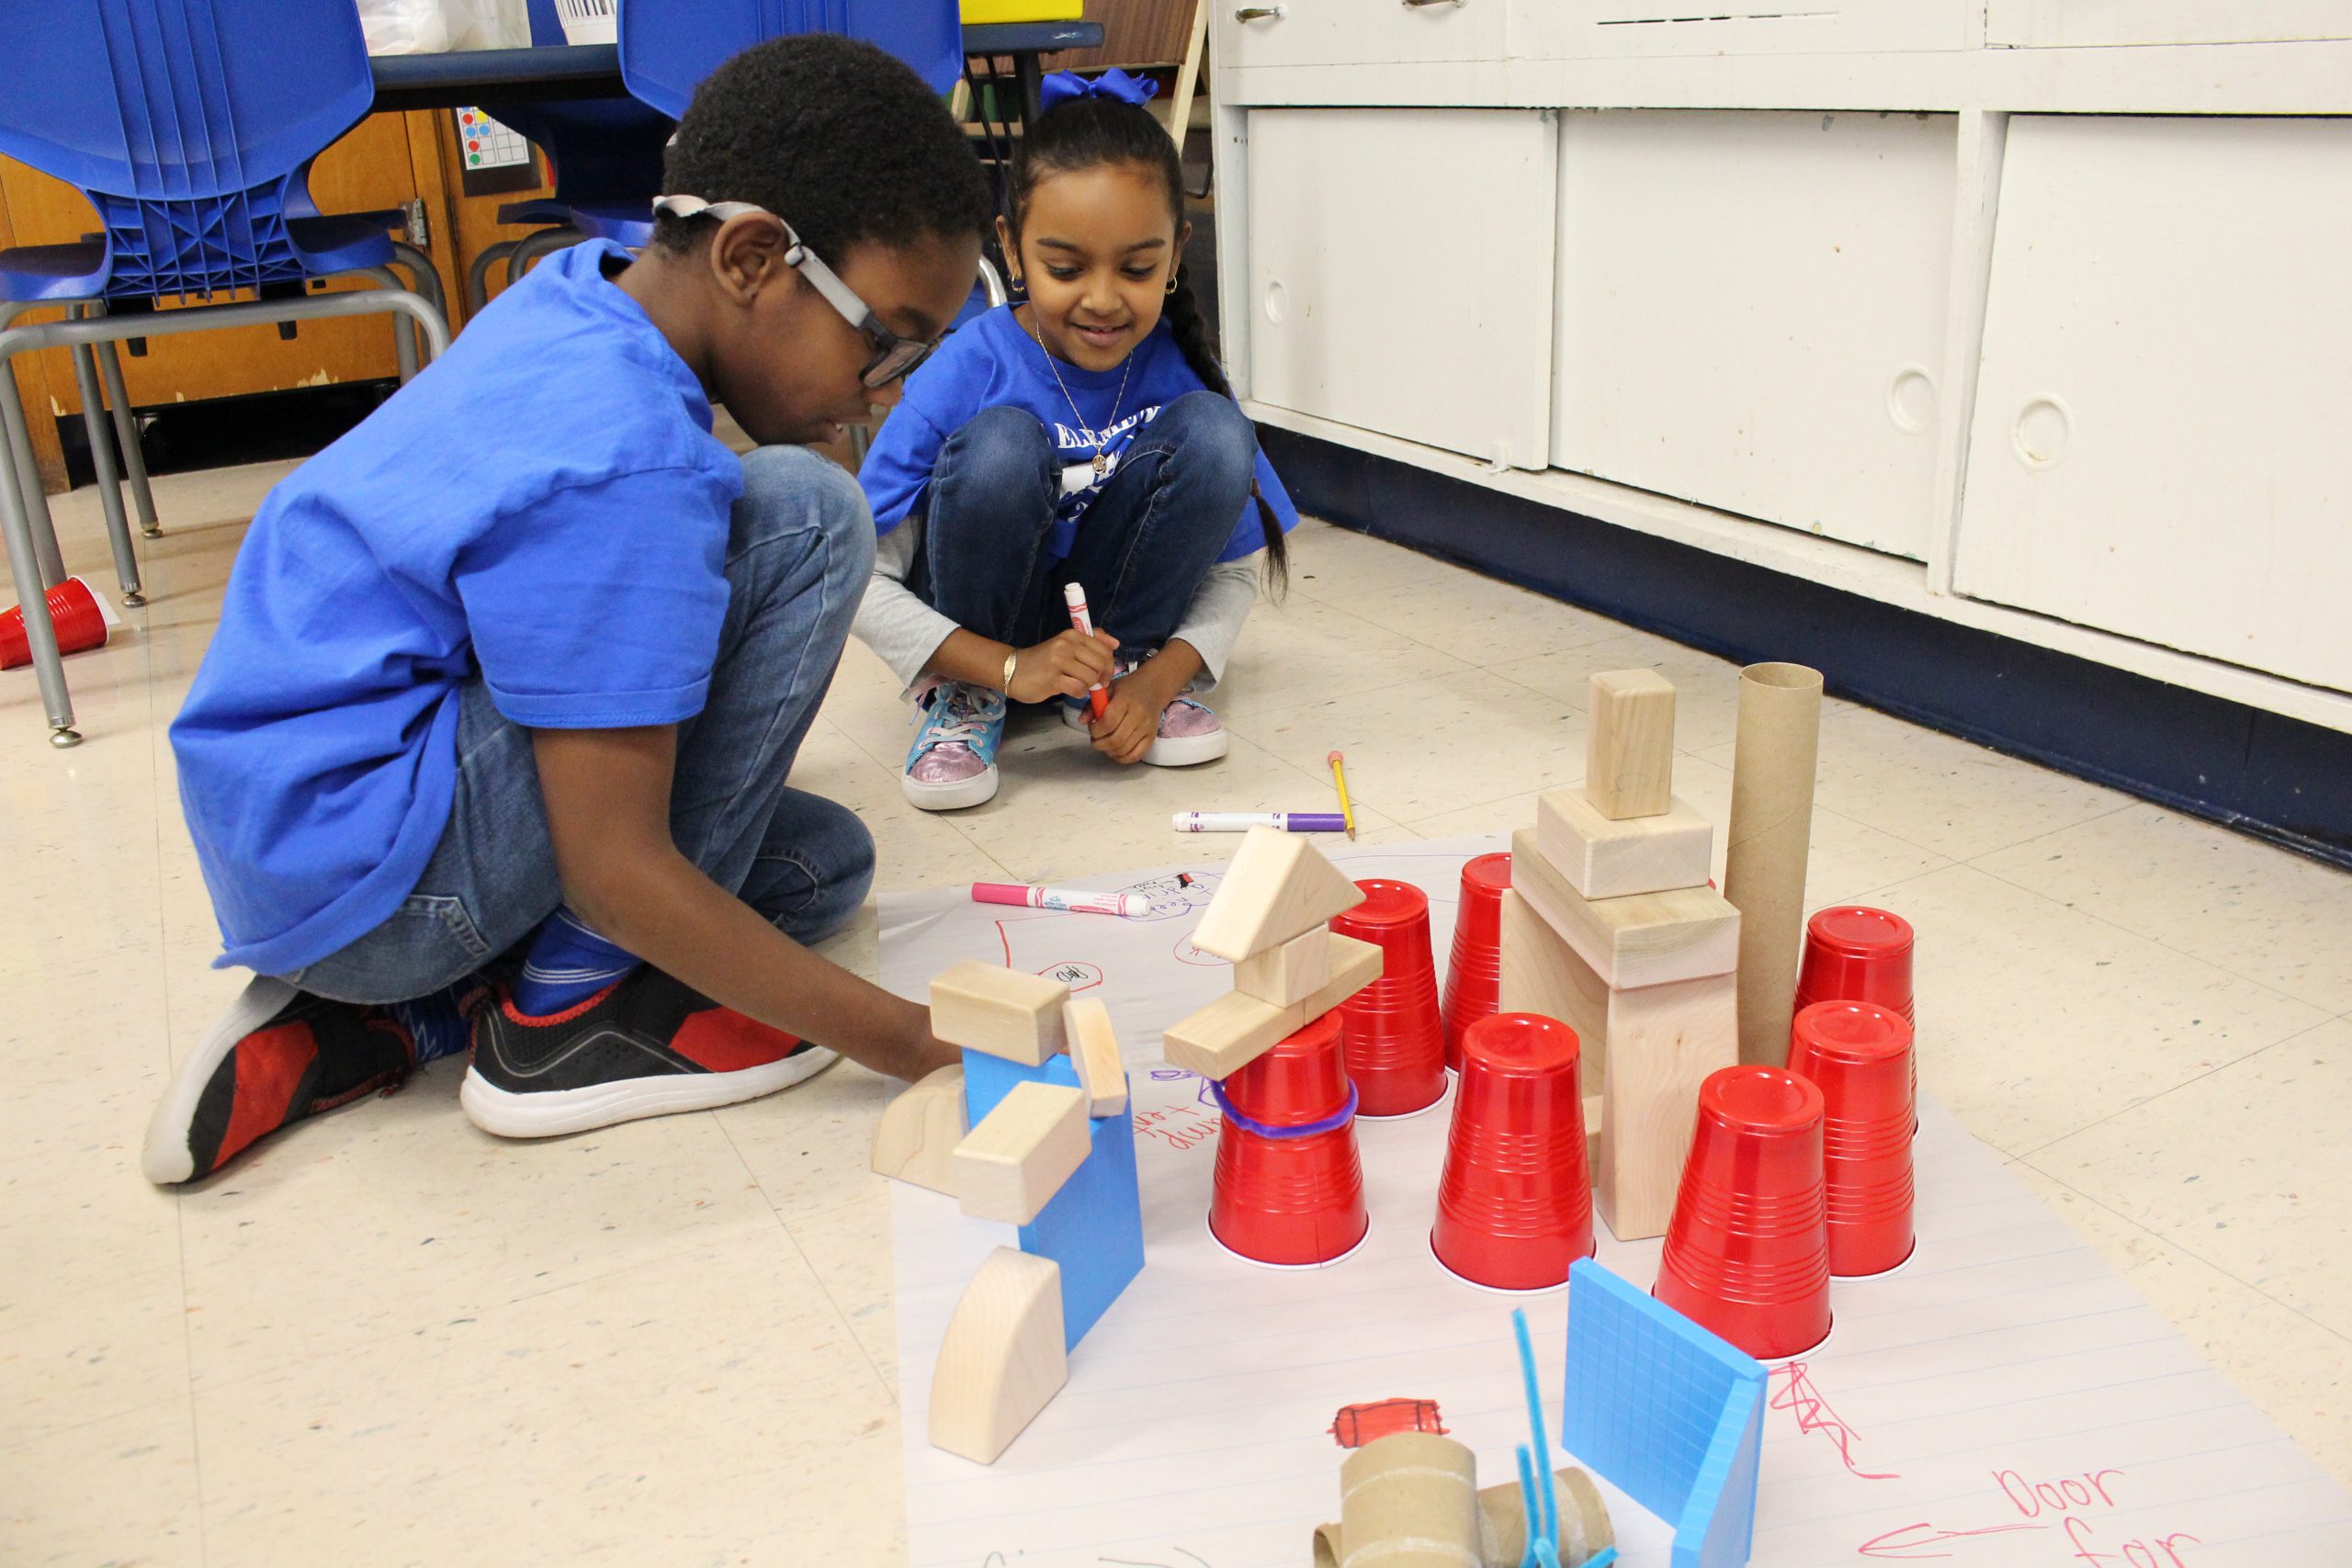 two students are crouched down on the floor and looking at a project they are working on with building blocks 